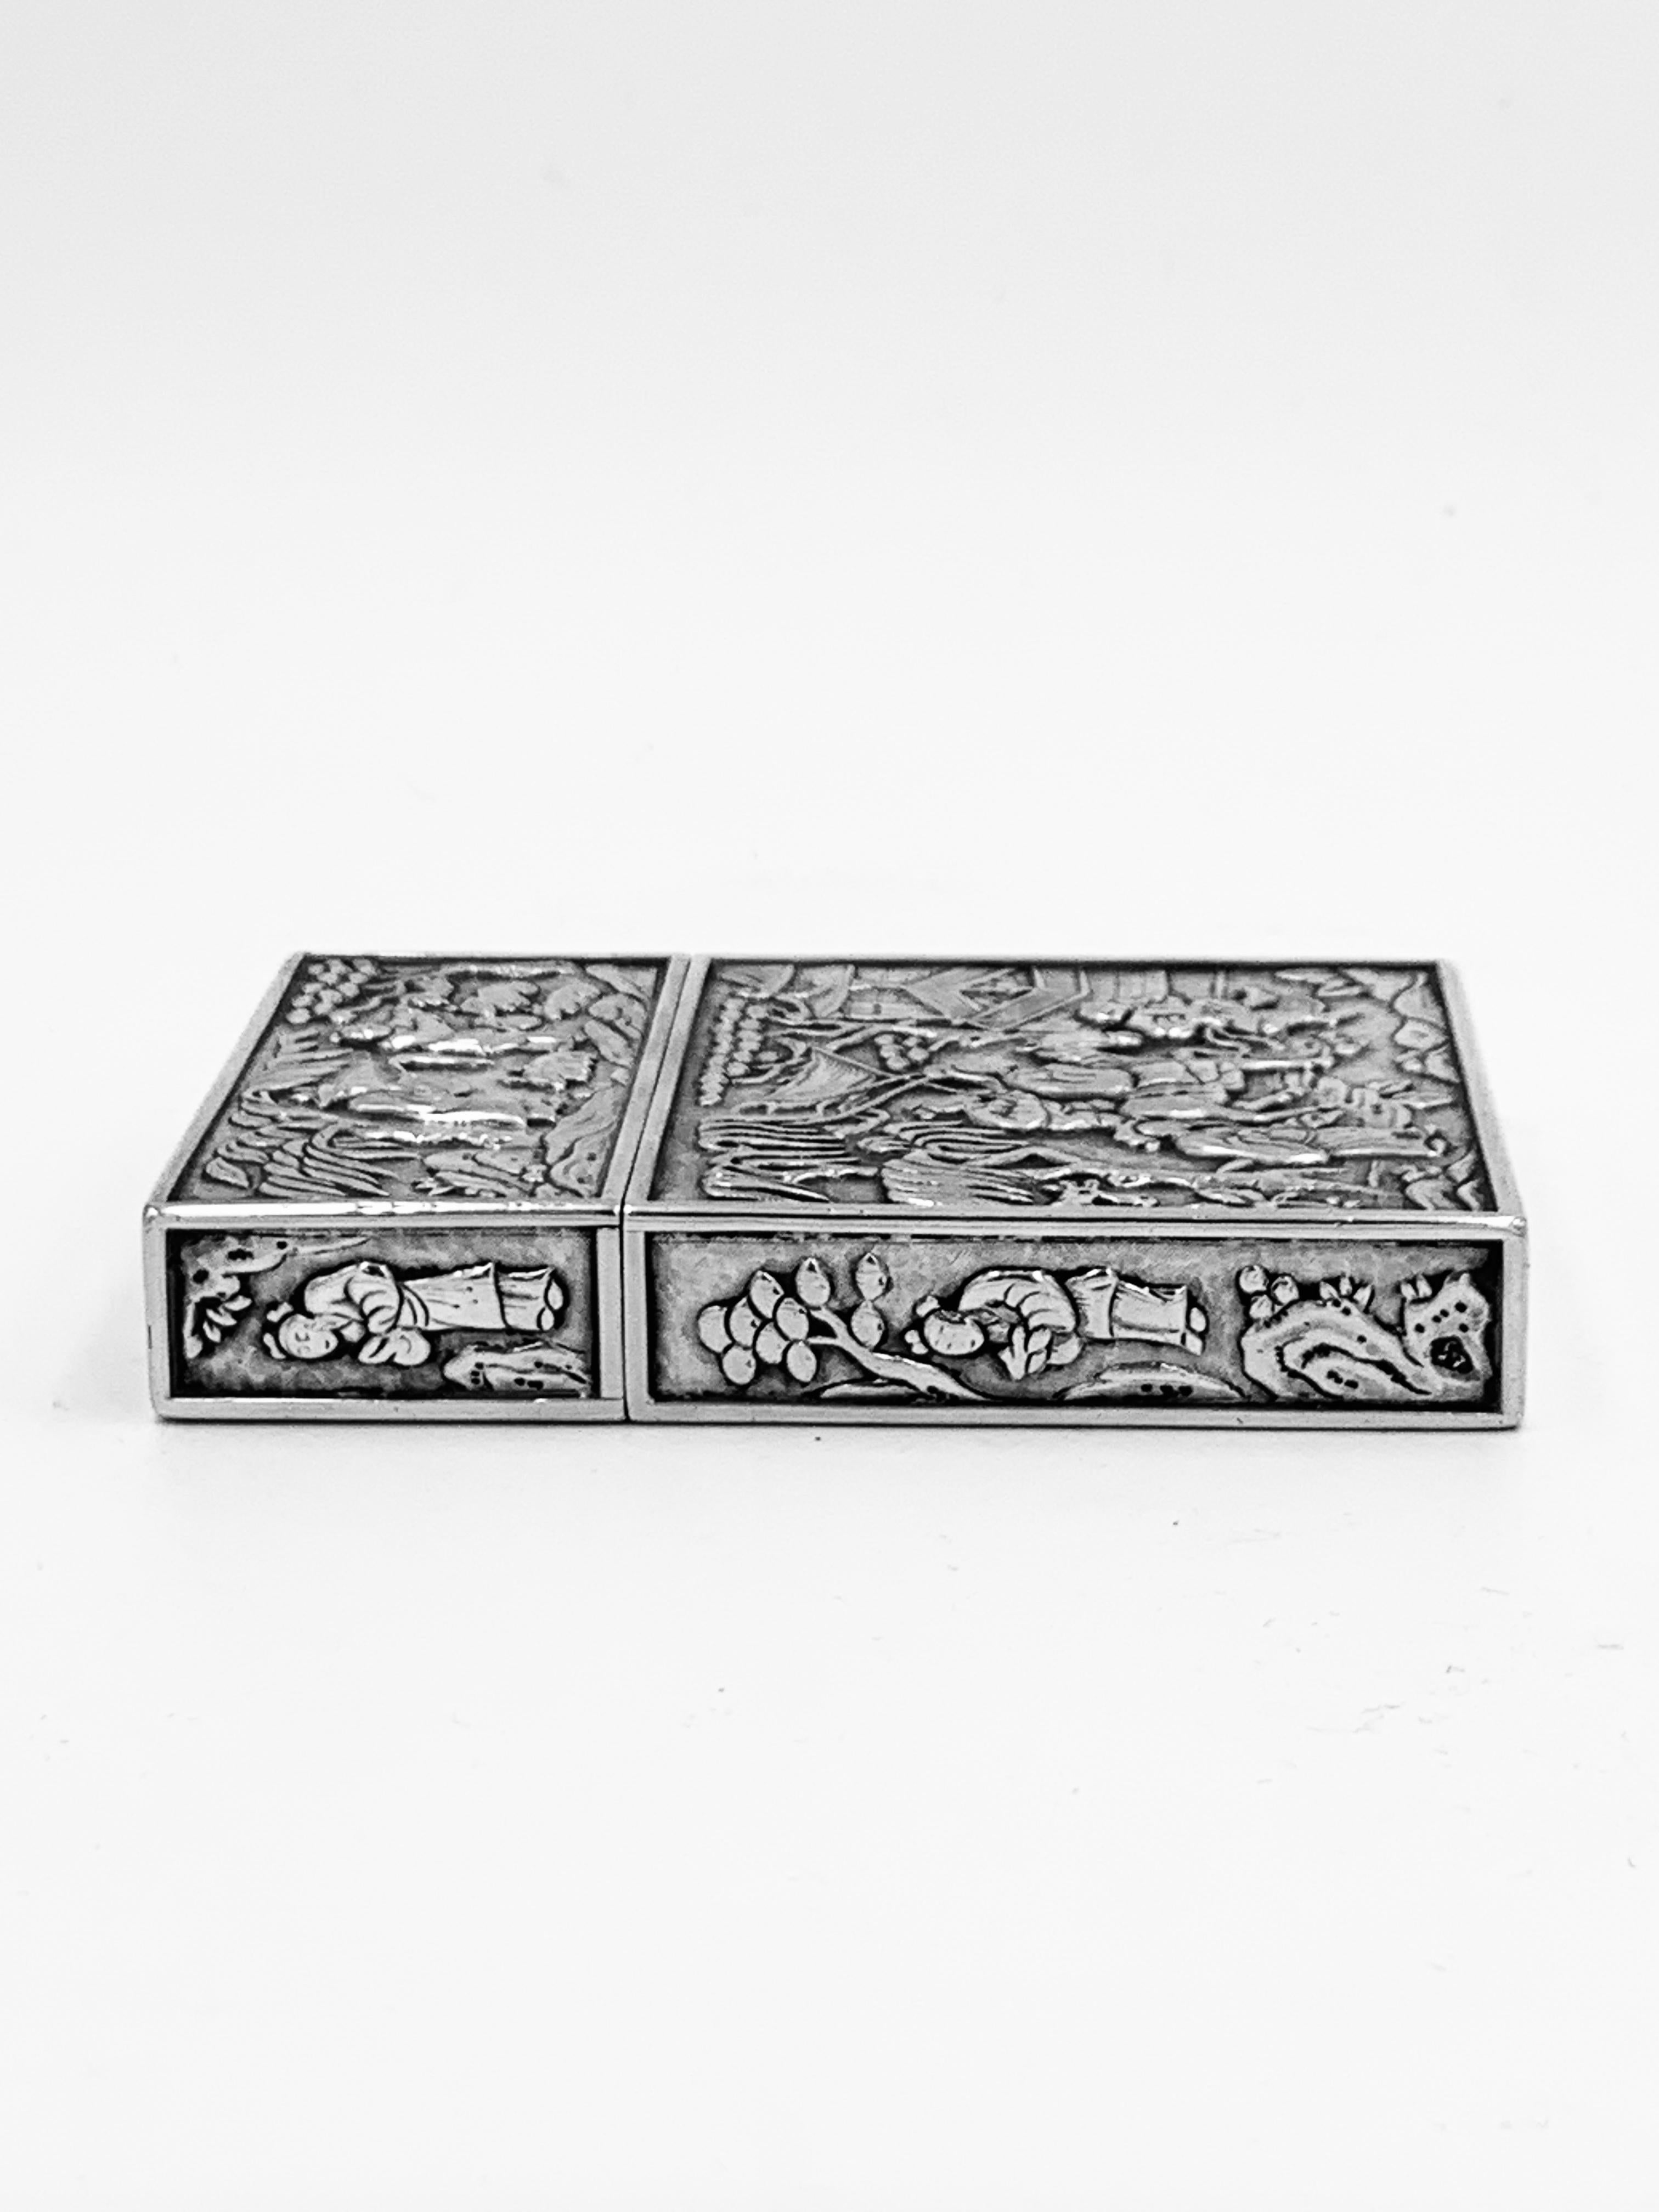 A Chinese Export Silver Card Case embossed and chased with figural scenes on a matte background, including playing Go and horse-riding. The top has a plain oval cartouche. It was retailed by the firm of Wong Shing, Canton c1835. Wong Shing was a